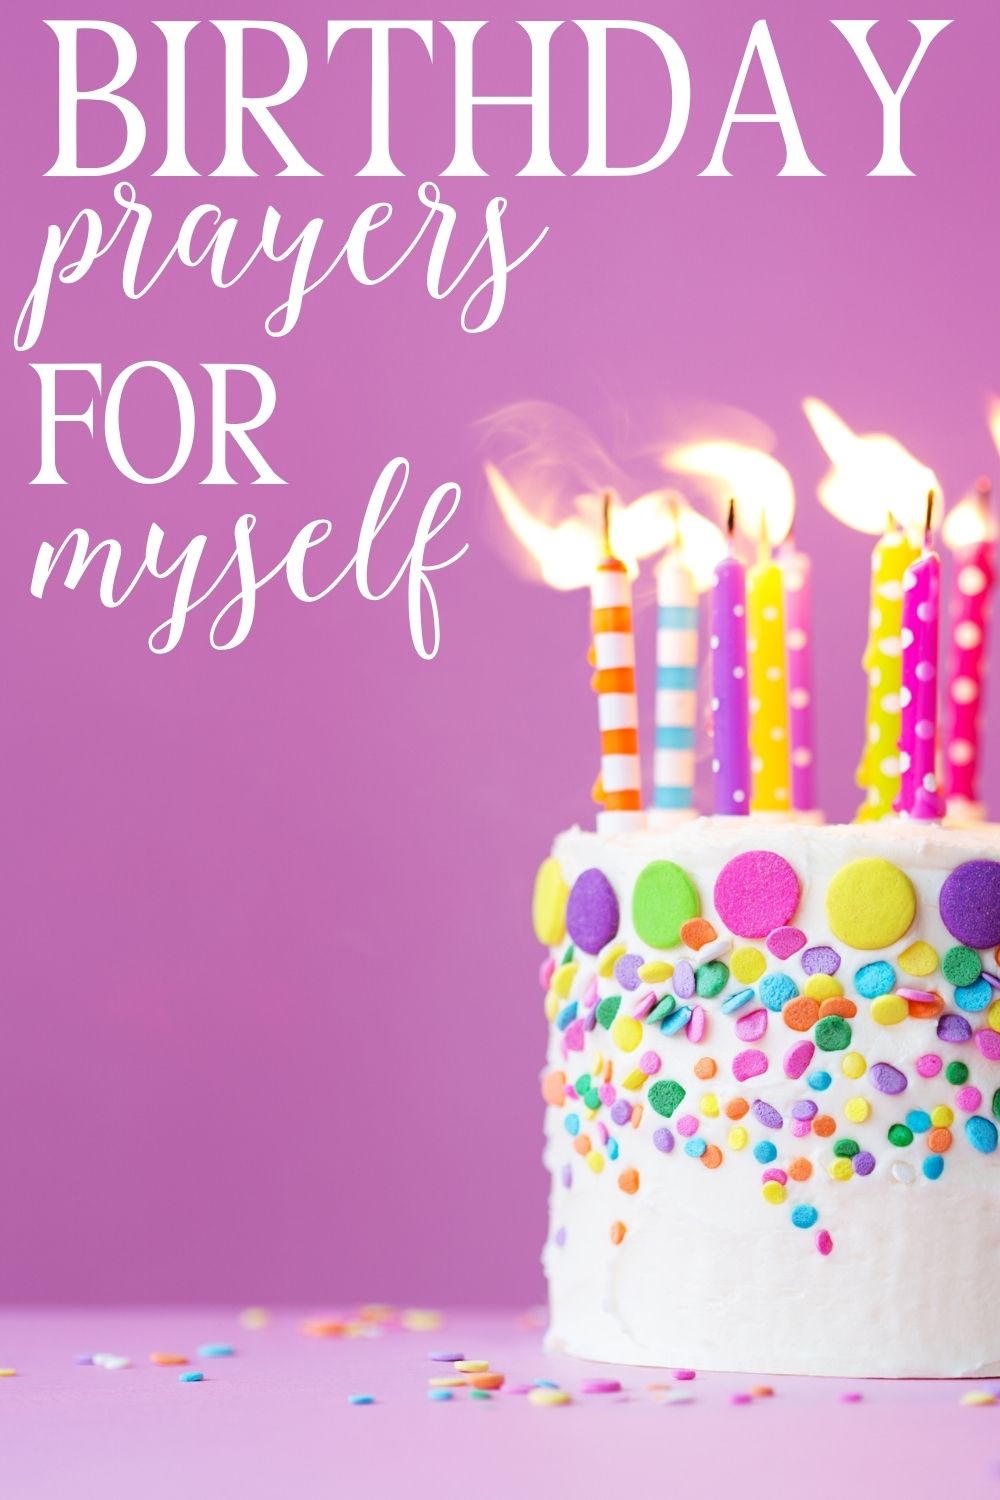 Pinterest pin about birthday prayers for myself with a fun white cake with colorful sprinkles and candles